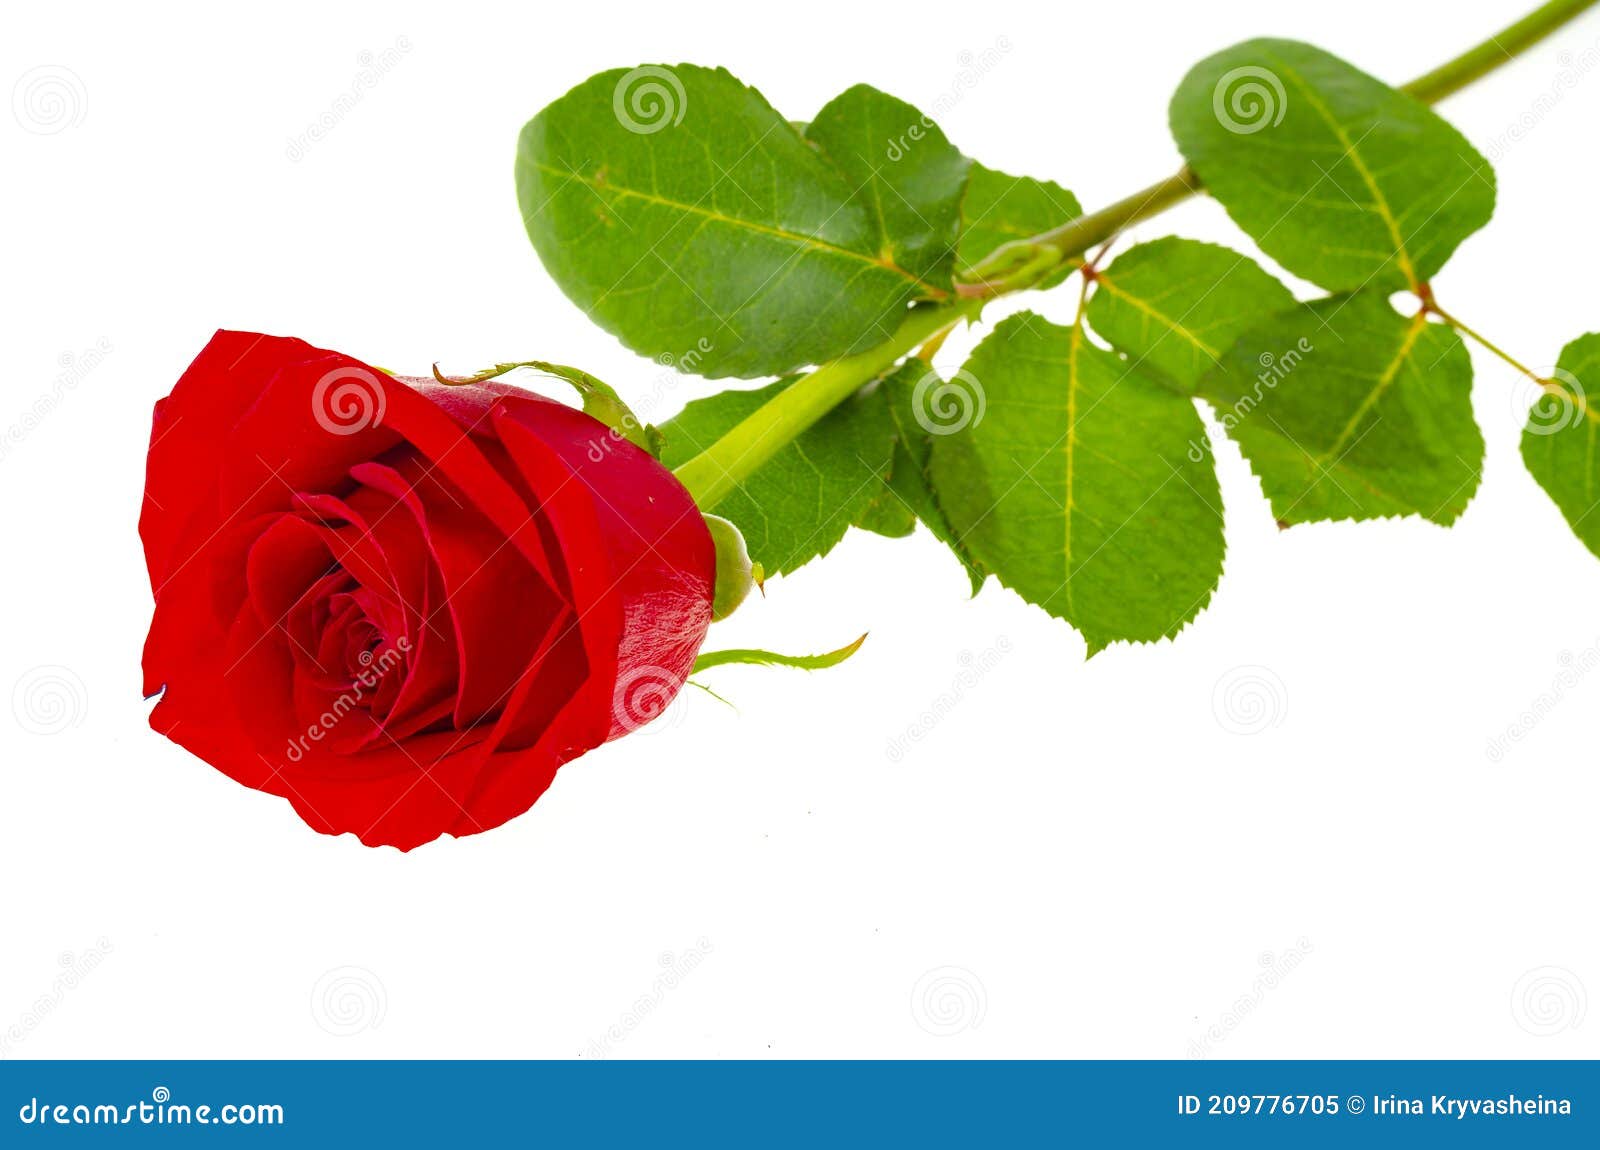 Dark Red Roses Isolated on White Background Stock Image - Image of gift ...